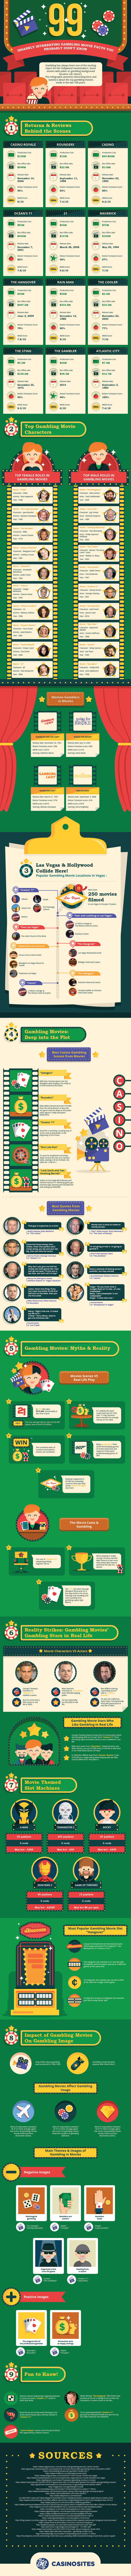 infographic-gambling-movies-01.png